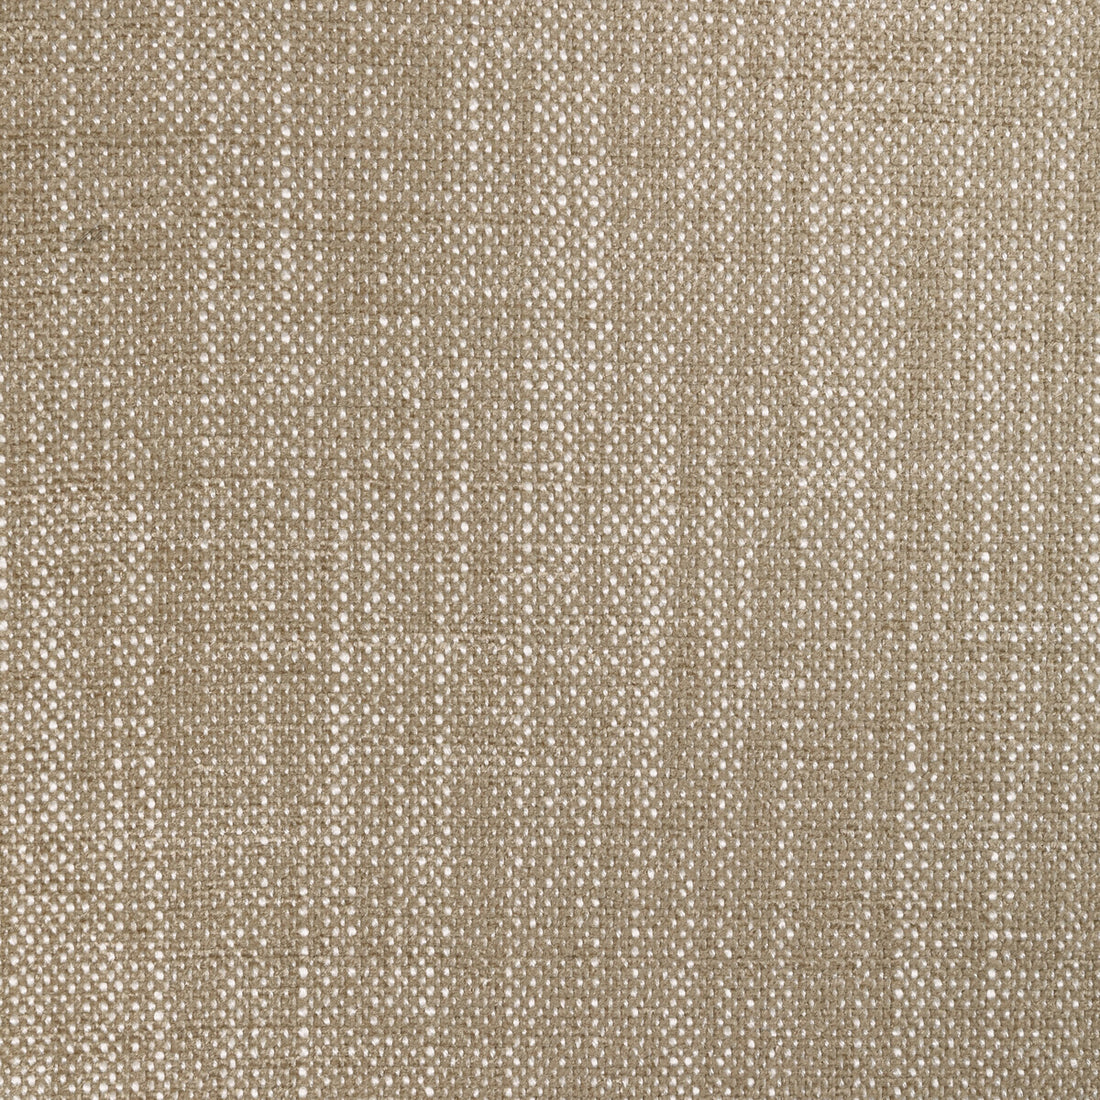 Kravet Design fabric in 36408-1101 color - pattern 36408.1101.0 - by Kravet Design in the Performance Crypton Home collection